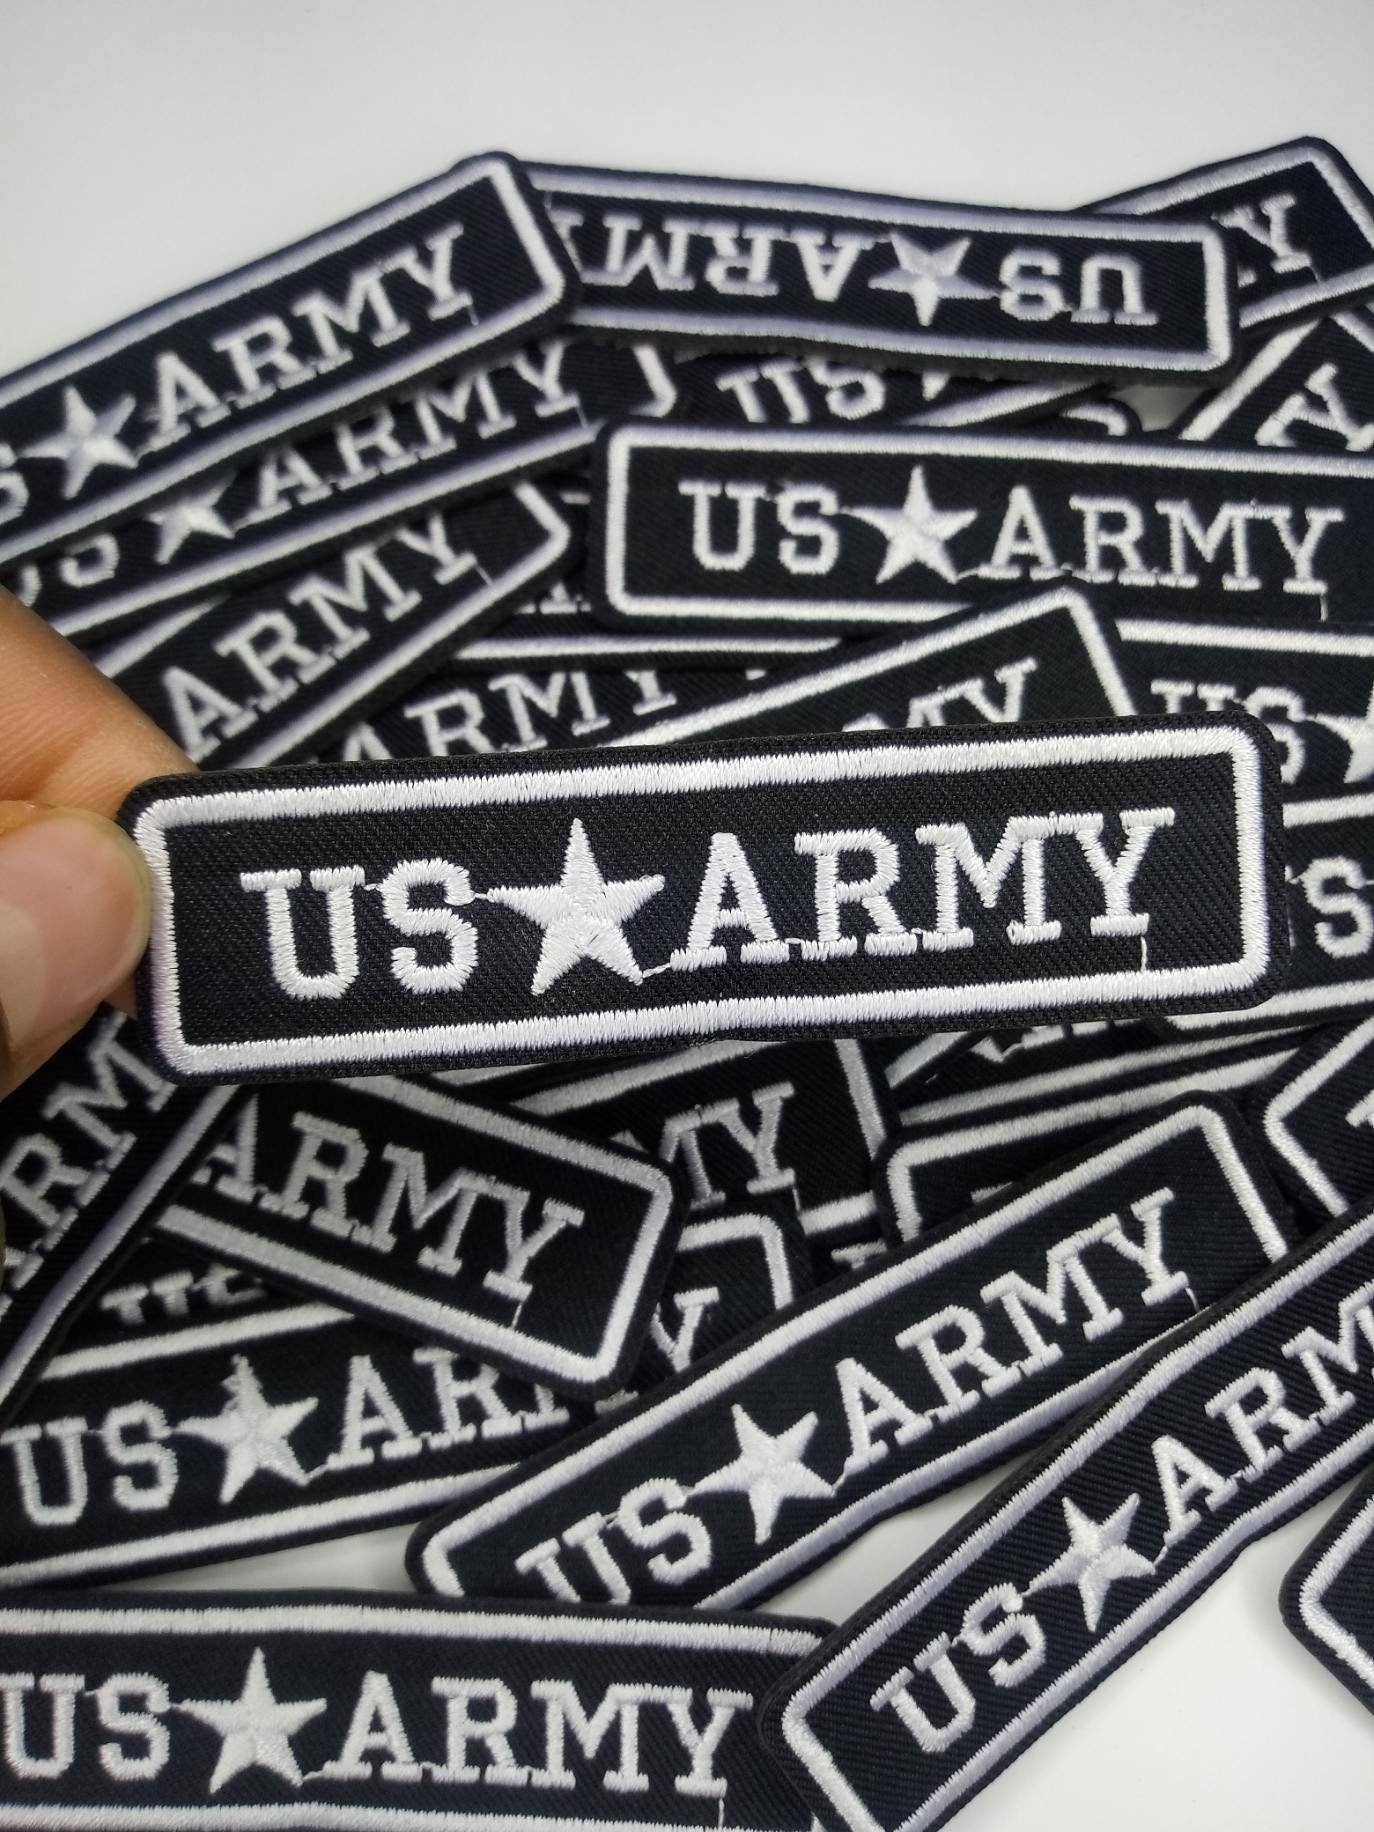 Military Emblem, Black and White "US ARMY" with a star Embroidery Patch, Size 3"x1", Cool Iron-on Patch, Applique for Clothing & Accessories